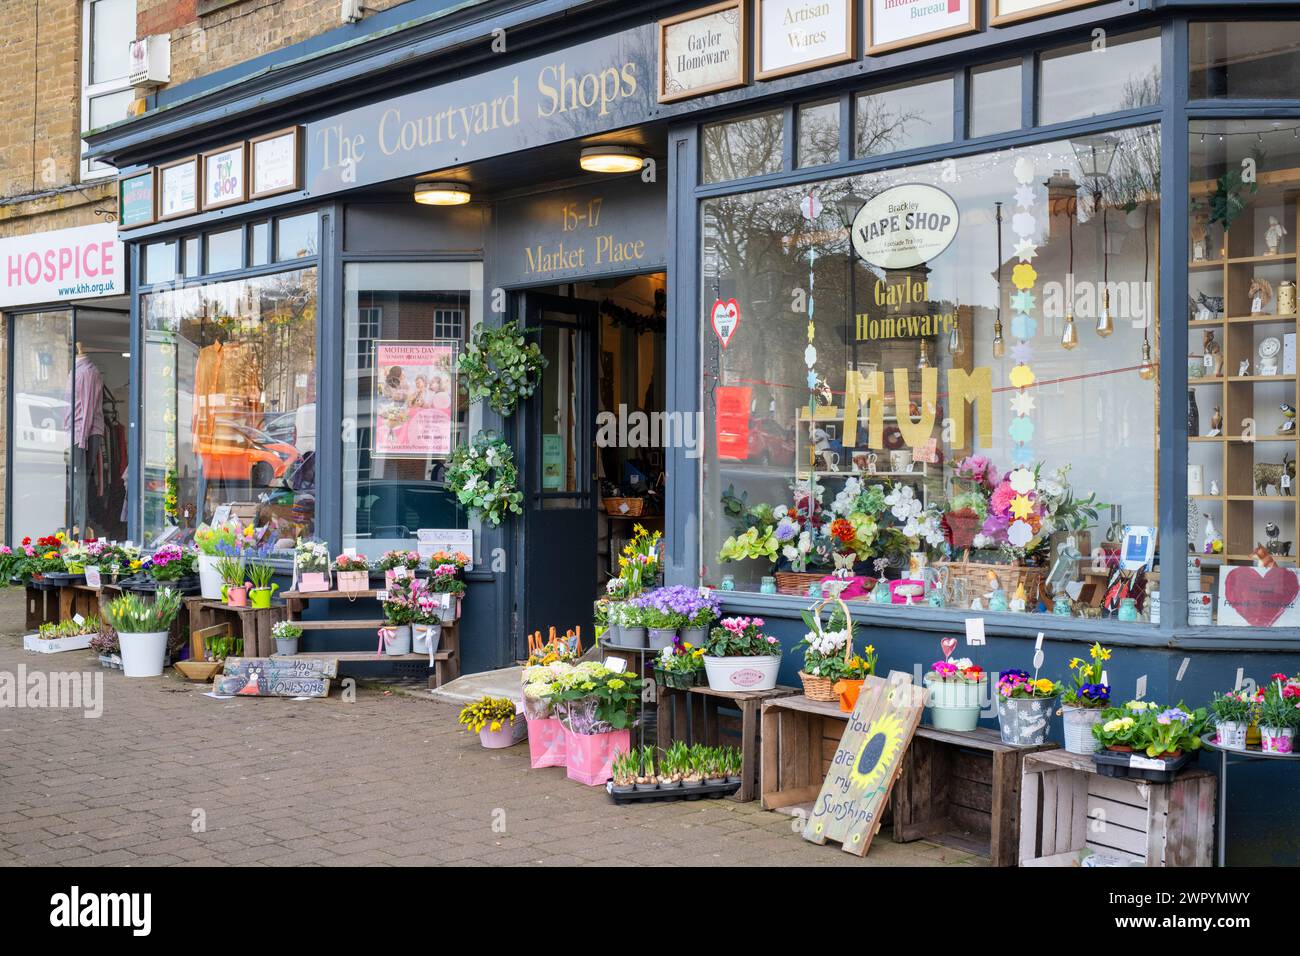 The Courtyard Shops on Mothers day. Brackley, Northamptonshire, England Stock Photo